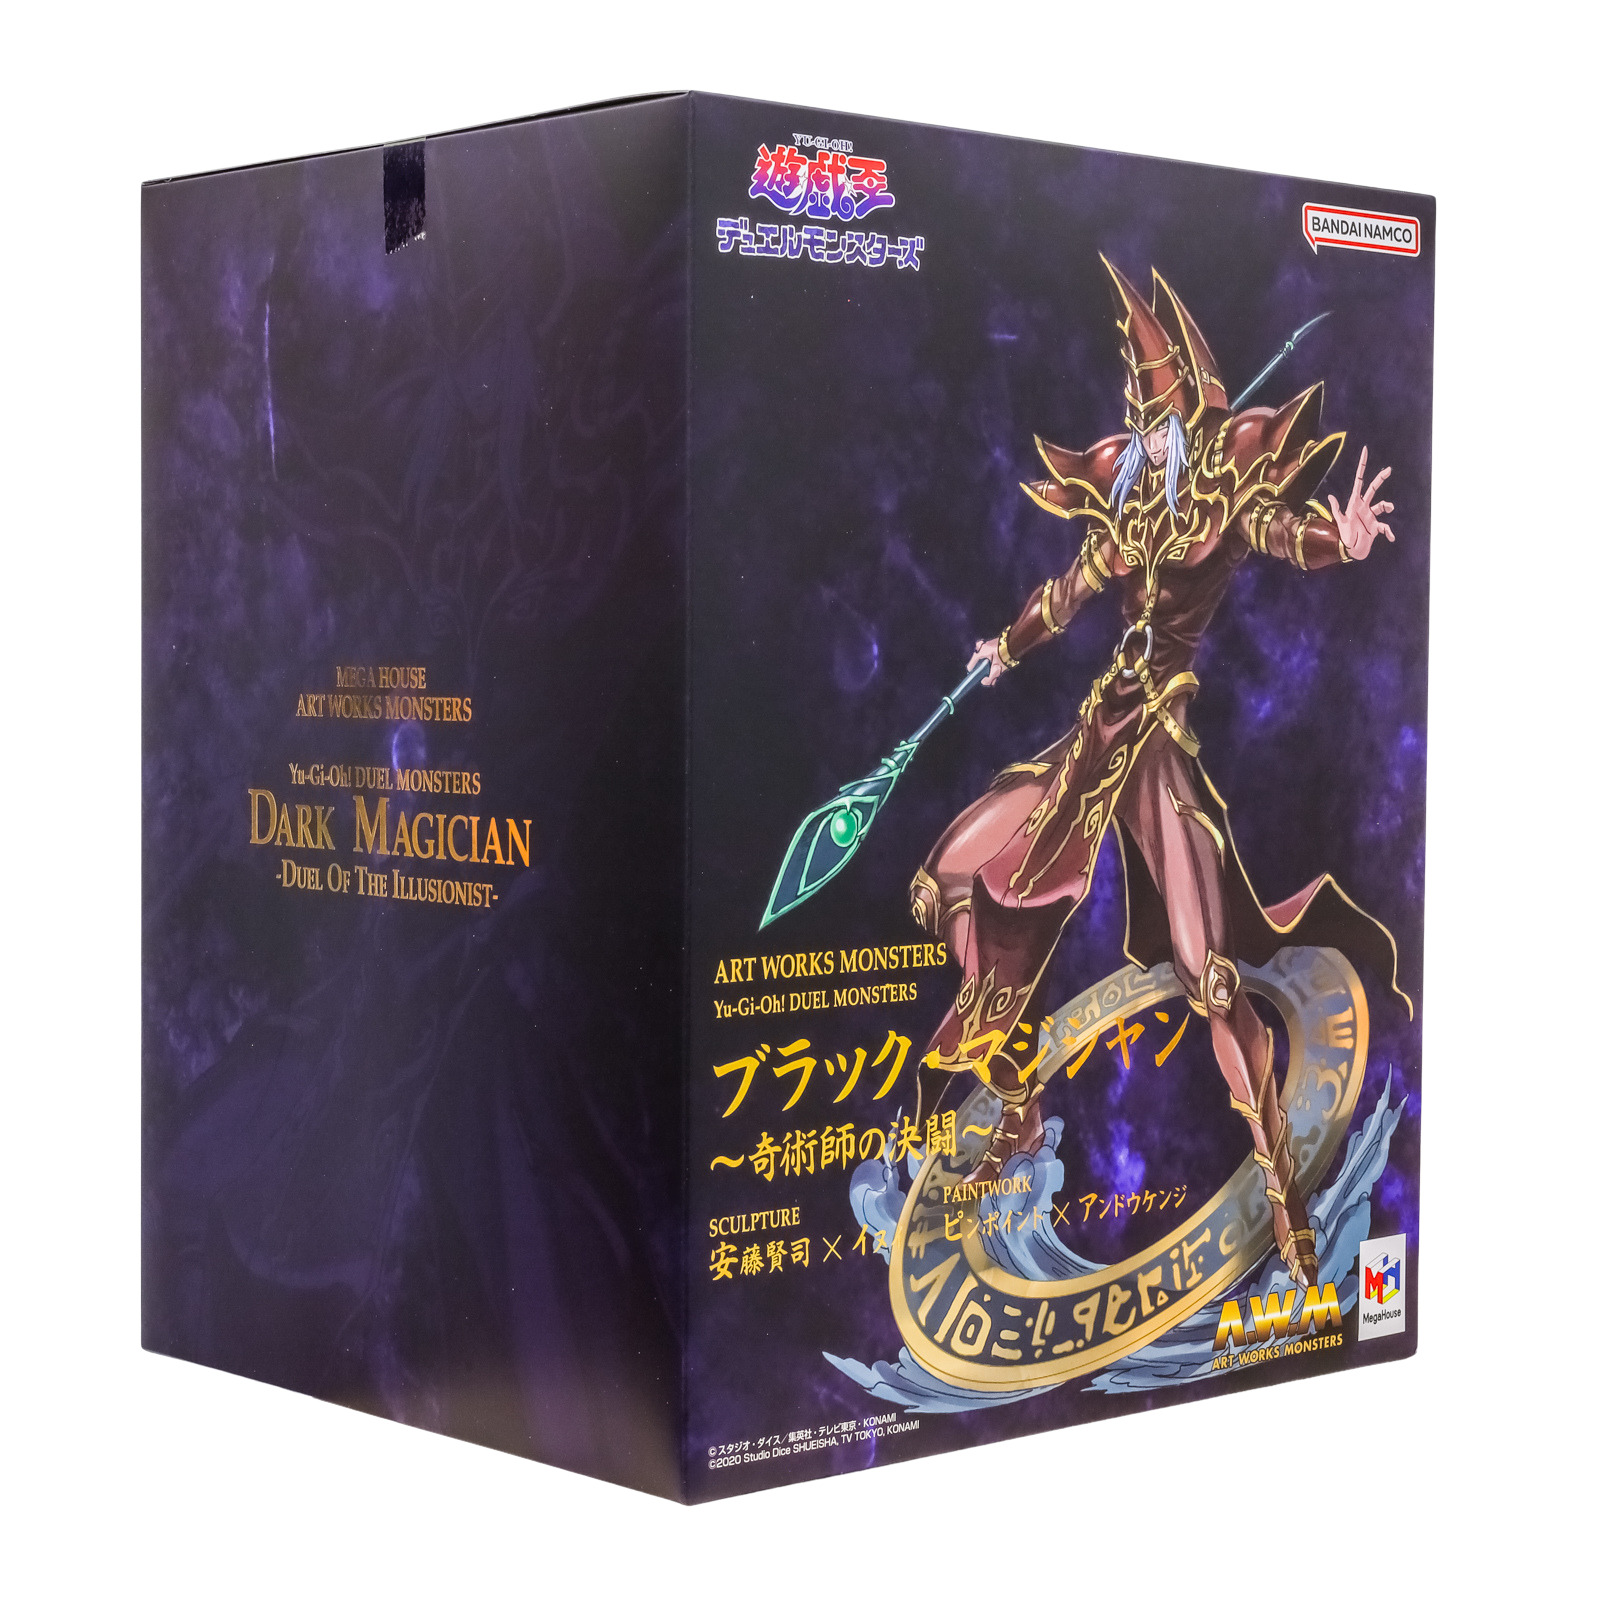 Yu-Gi-Oh Duel Monsters Art Works Monsters Dark Magician Duel of the Illusionist